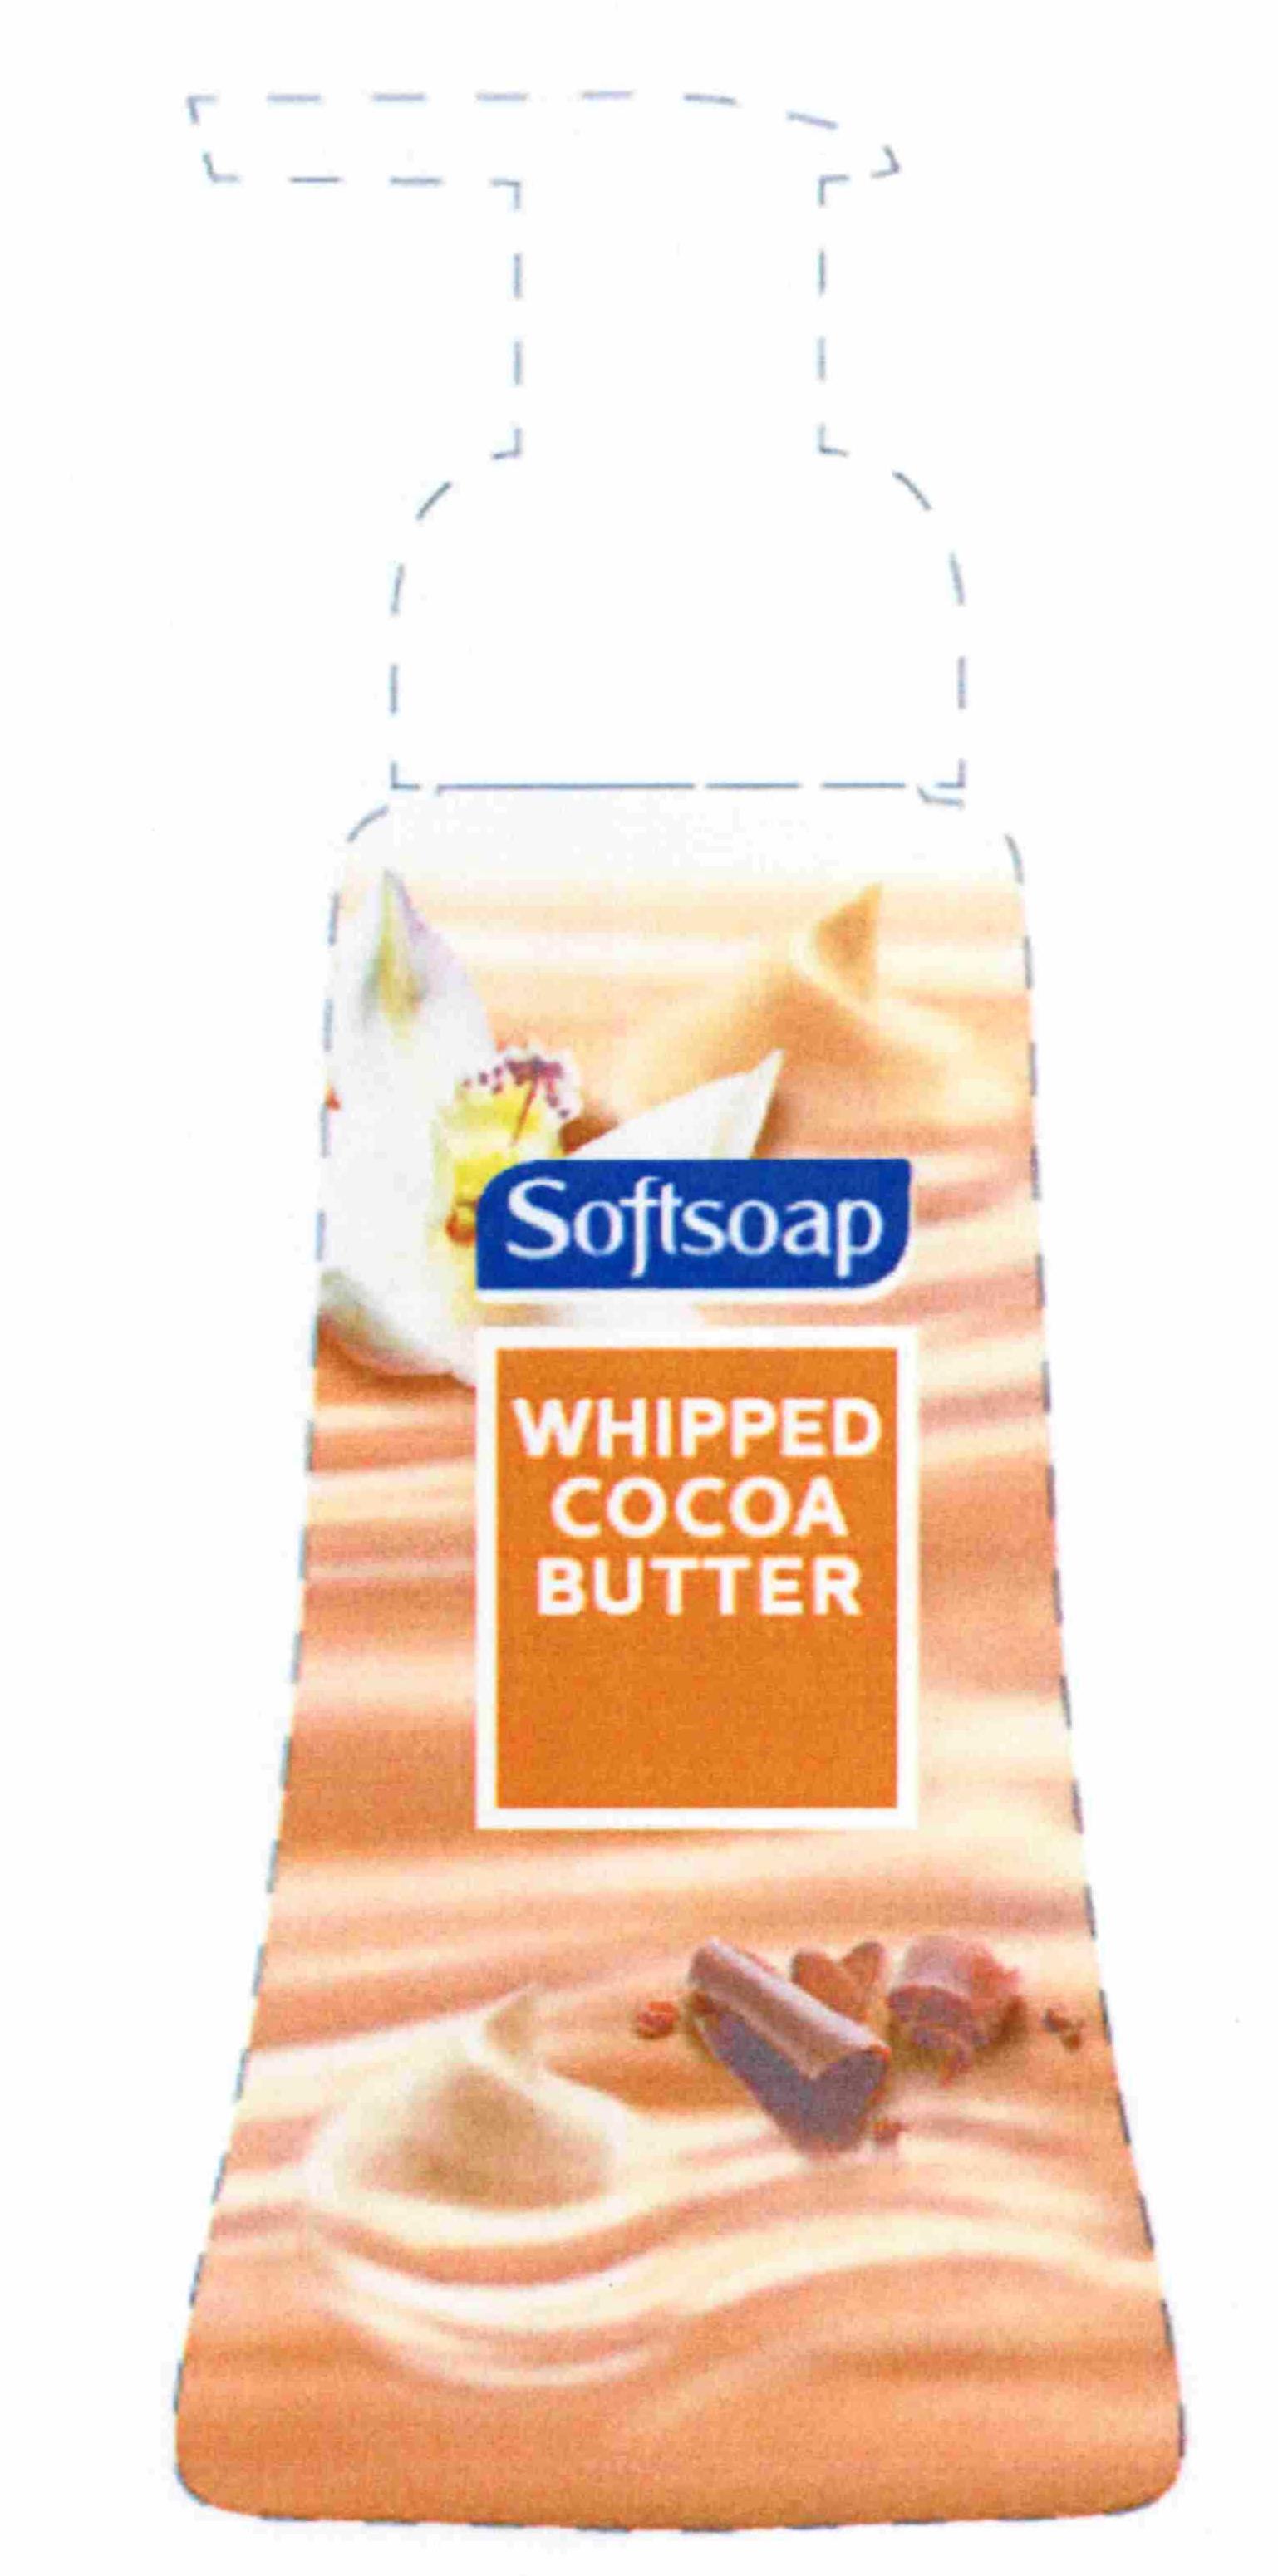  WHIPPED COCOA BUTTER SOFTSOAP